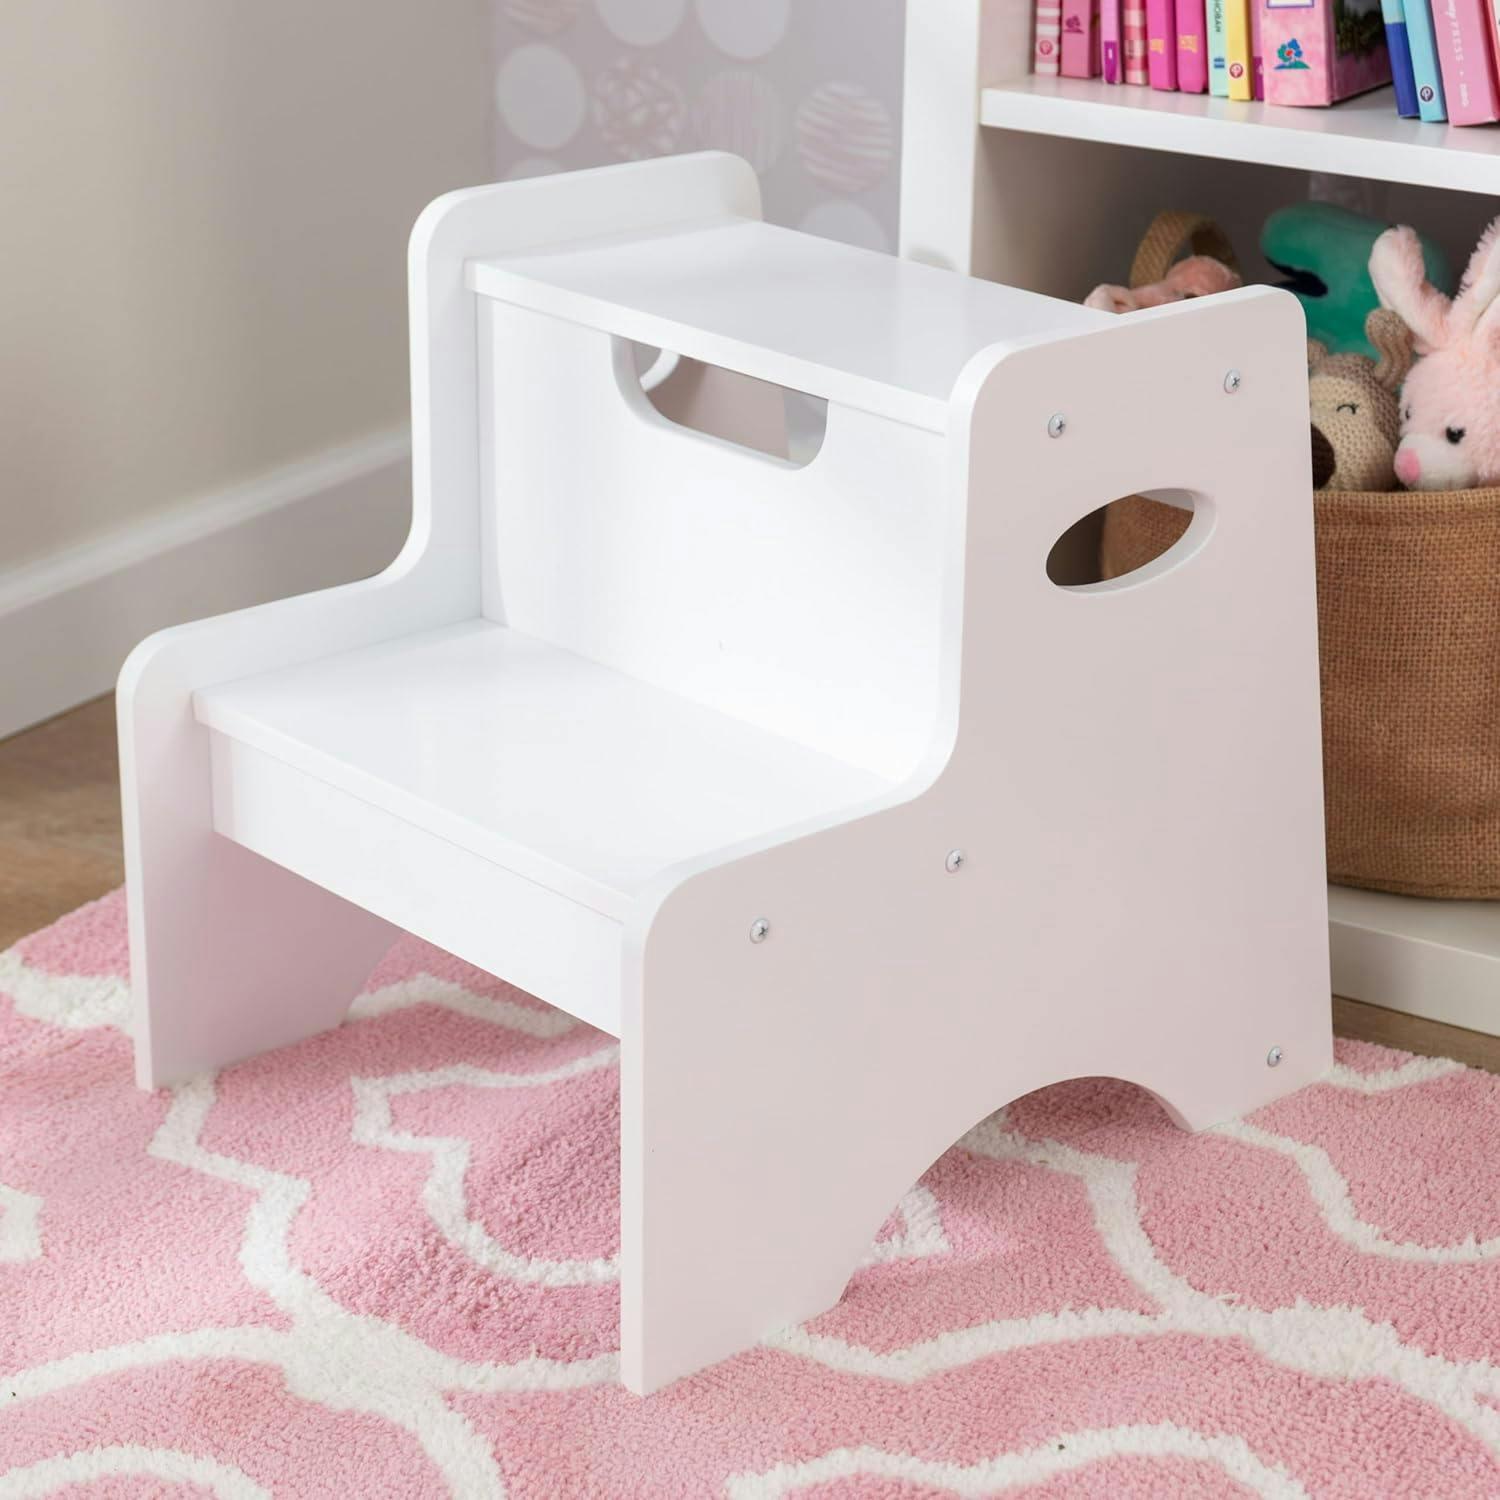 KidKraft Classic White Wooden Two-Step Children's Stool with Handles